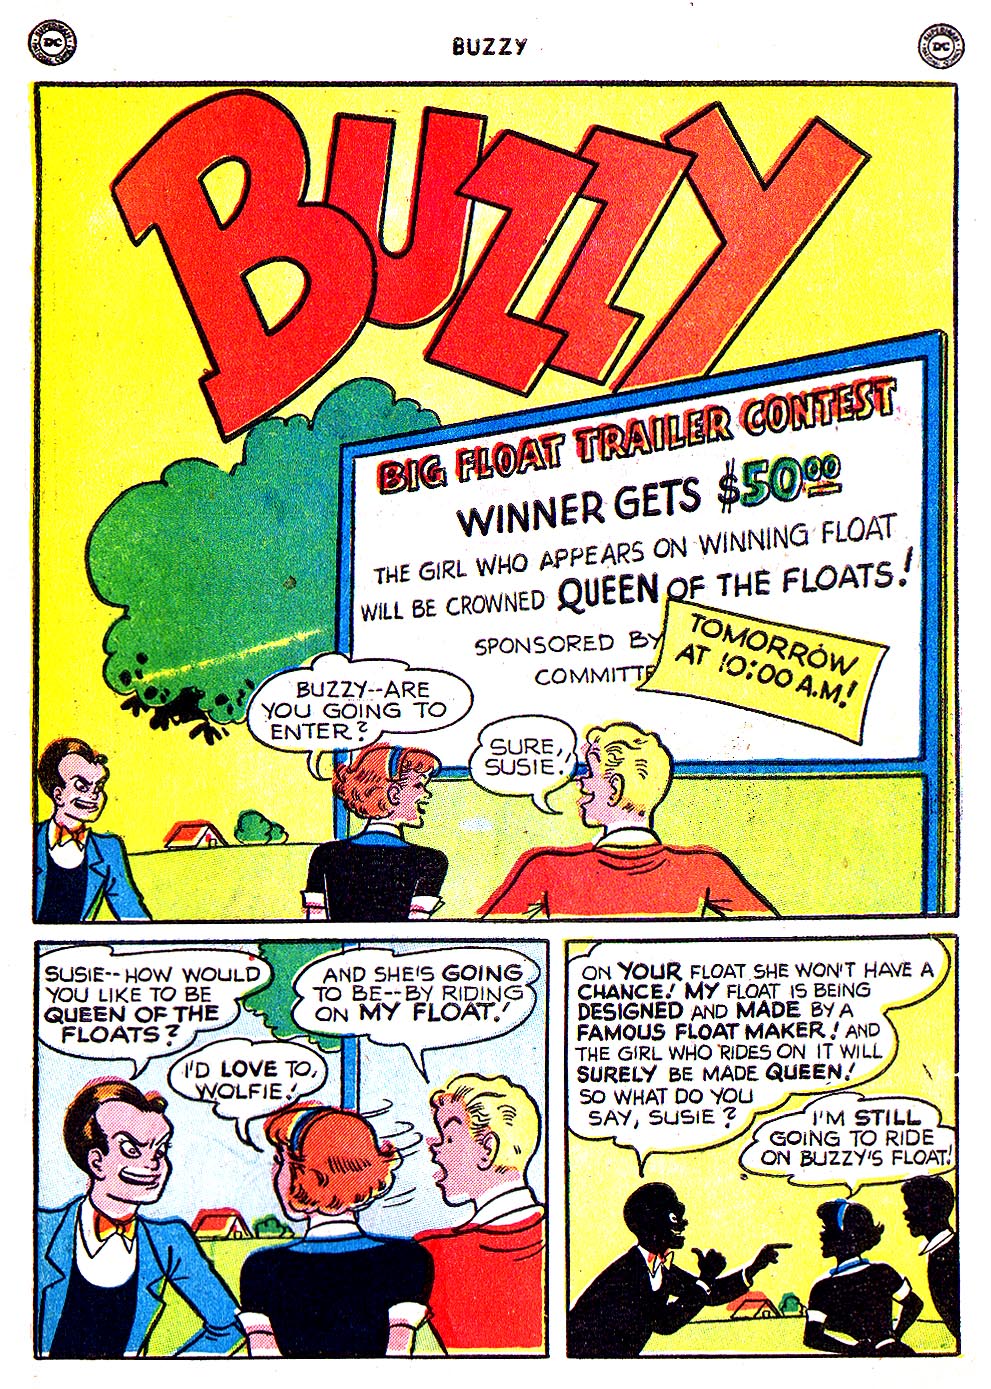 Read online Buzzy comic -  Issue #36 - 40